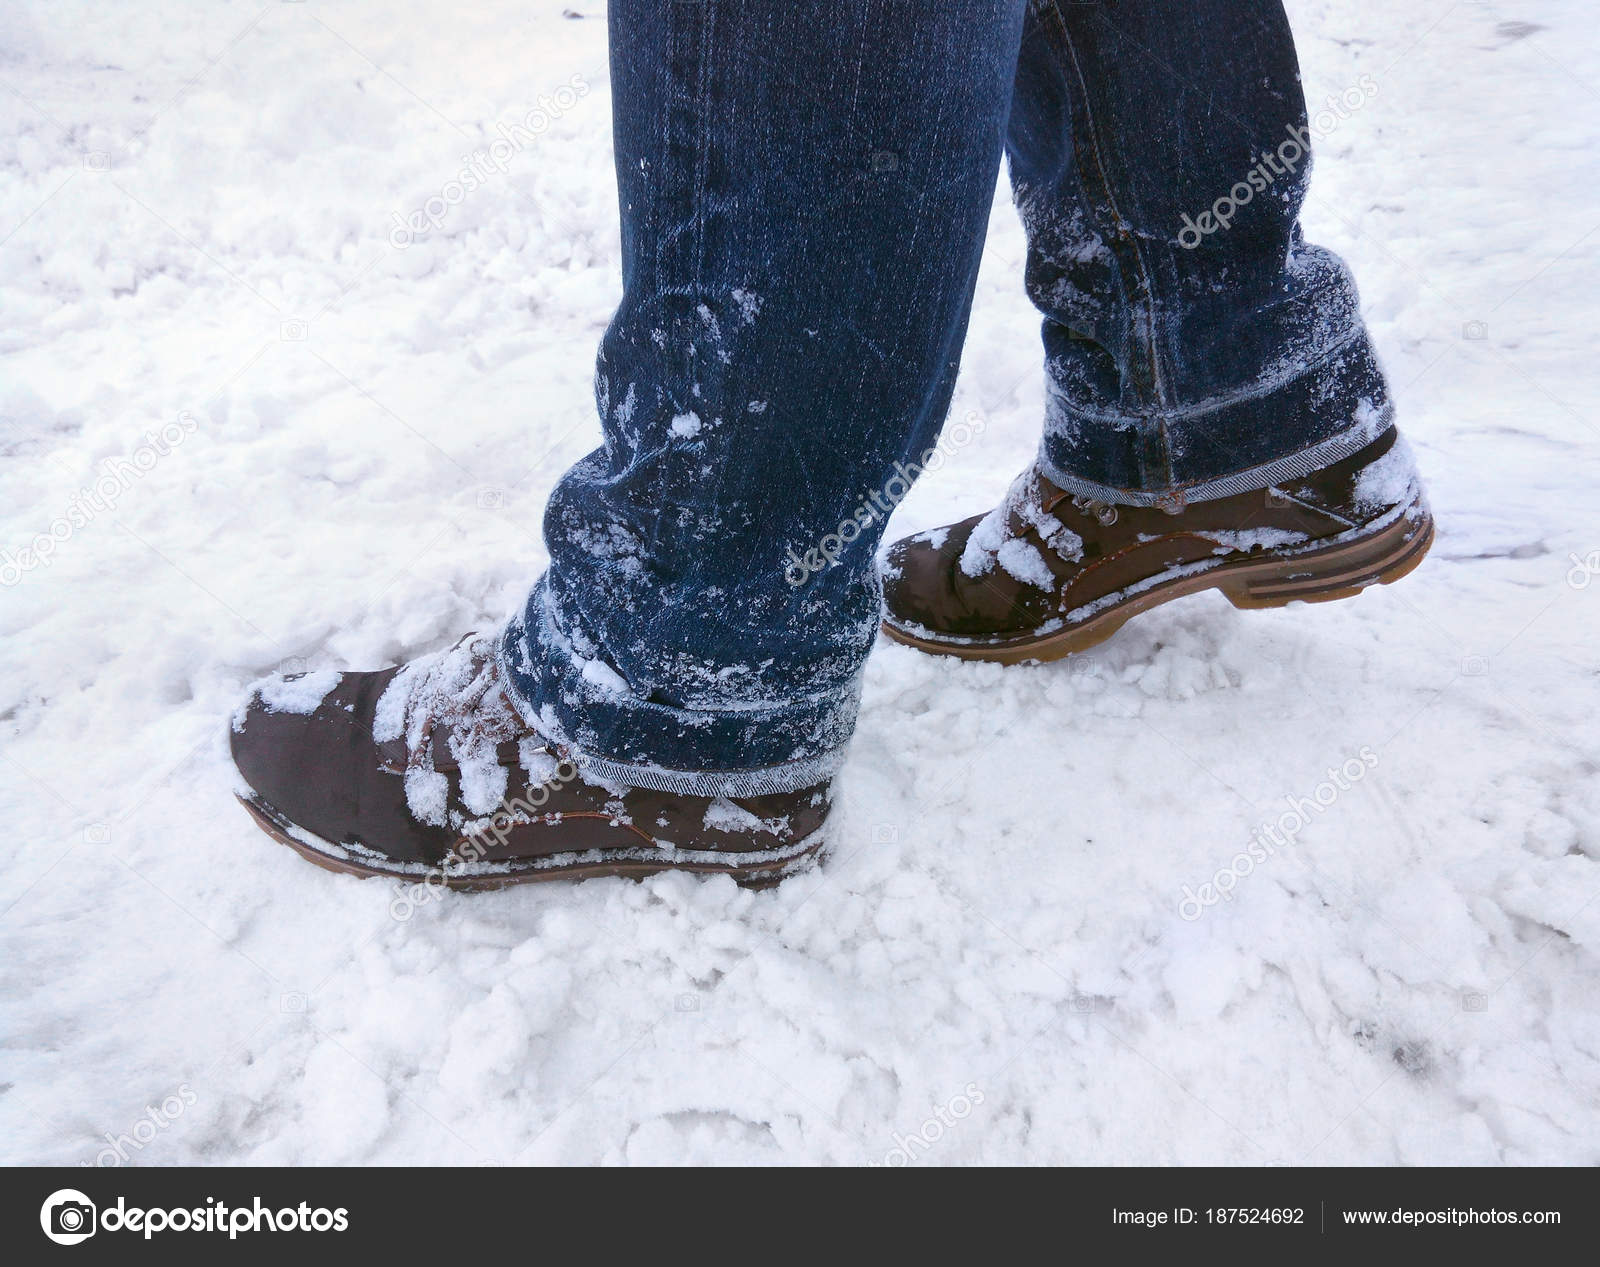 shoes for walking in snow and ice